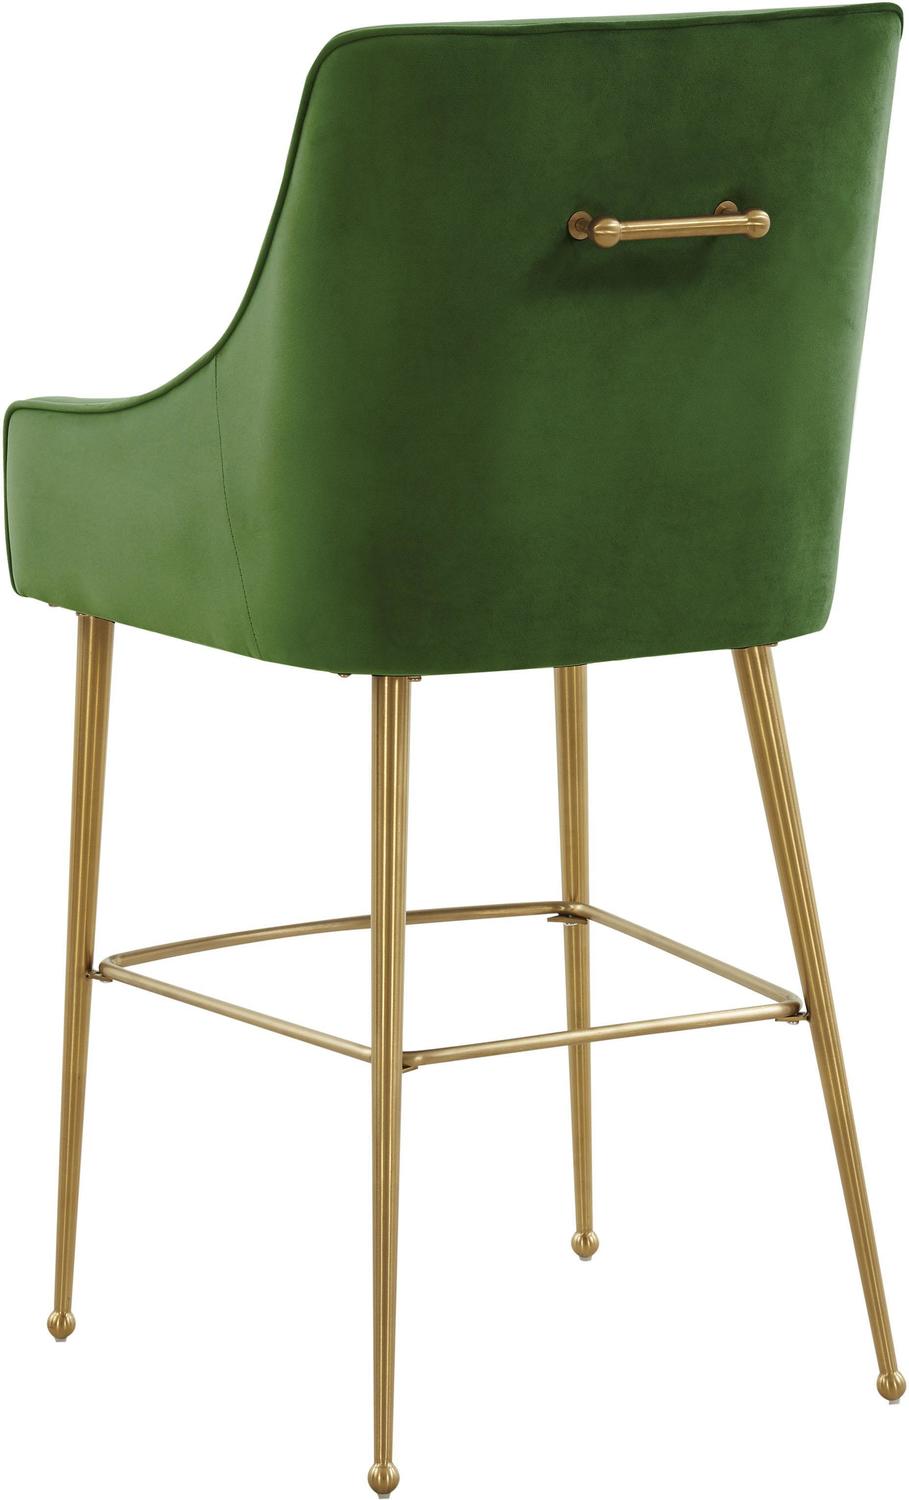 small high table with stools Tov Furniture Stools Green